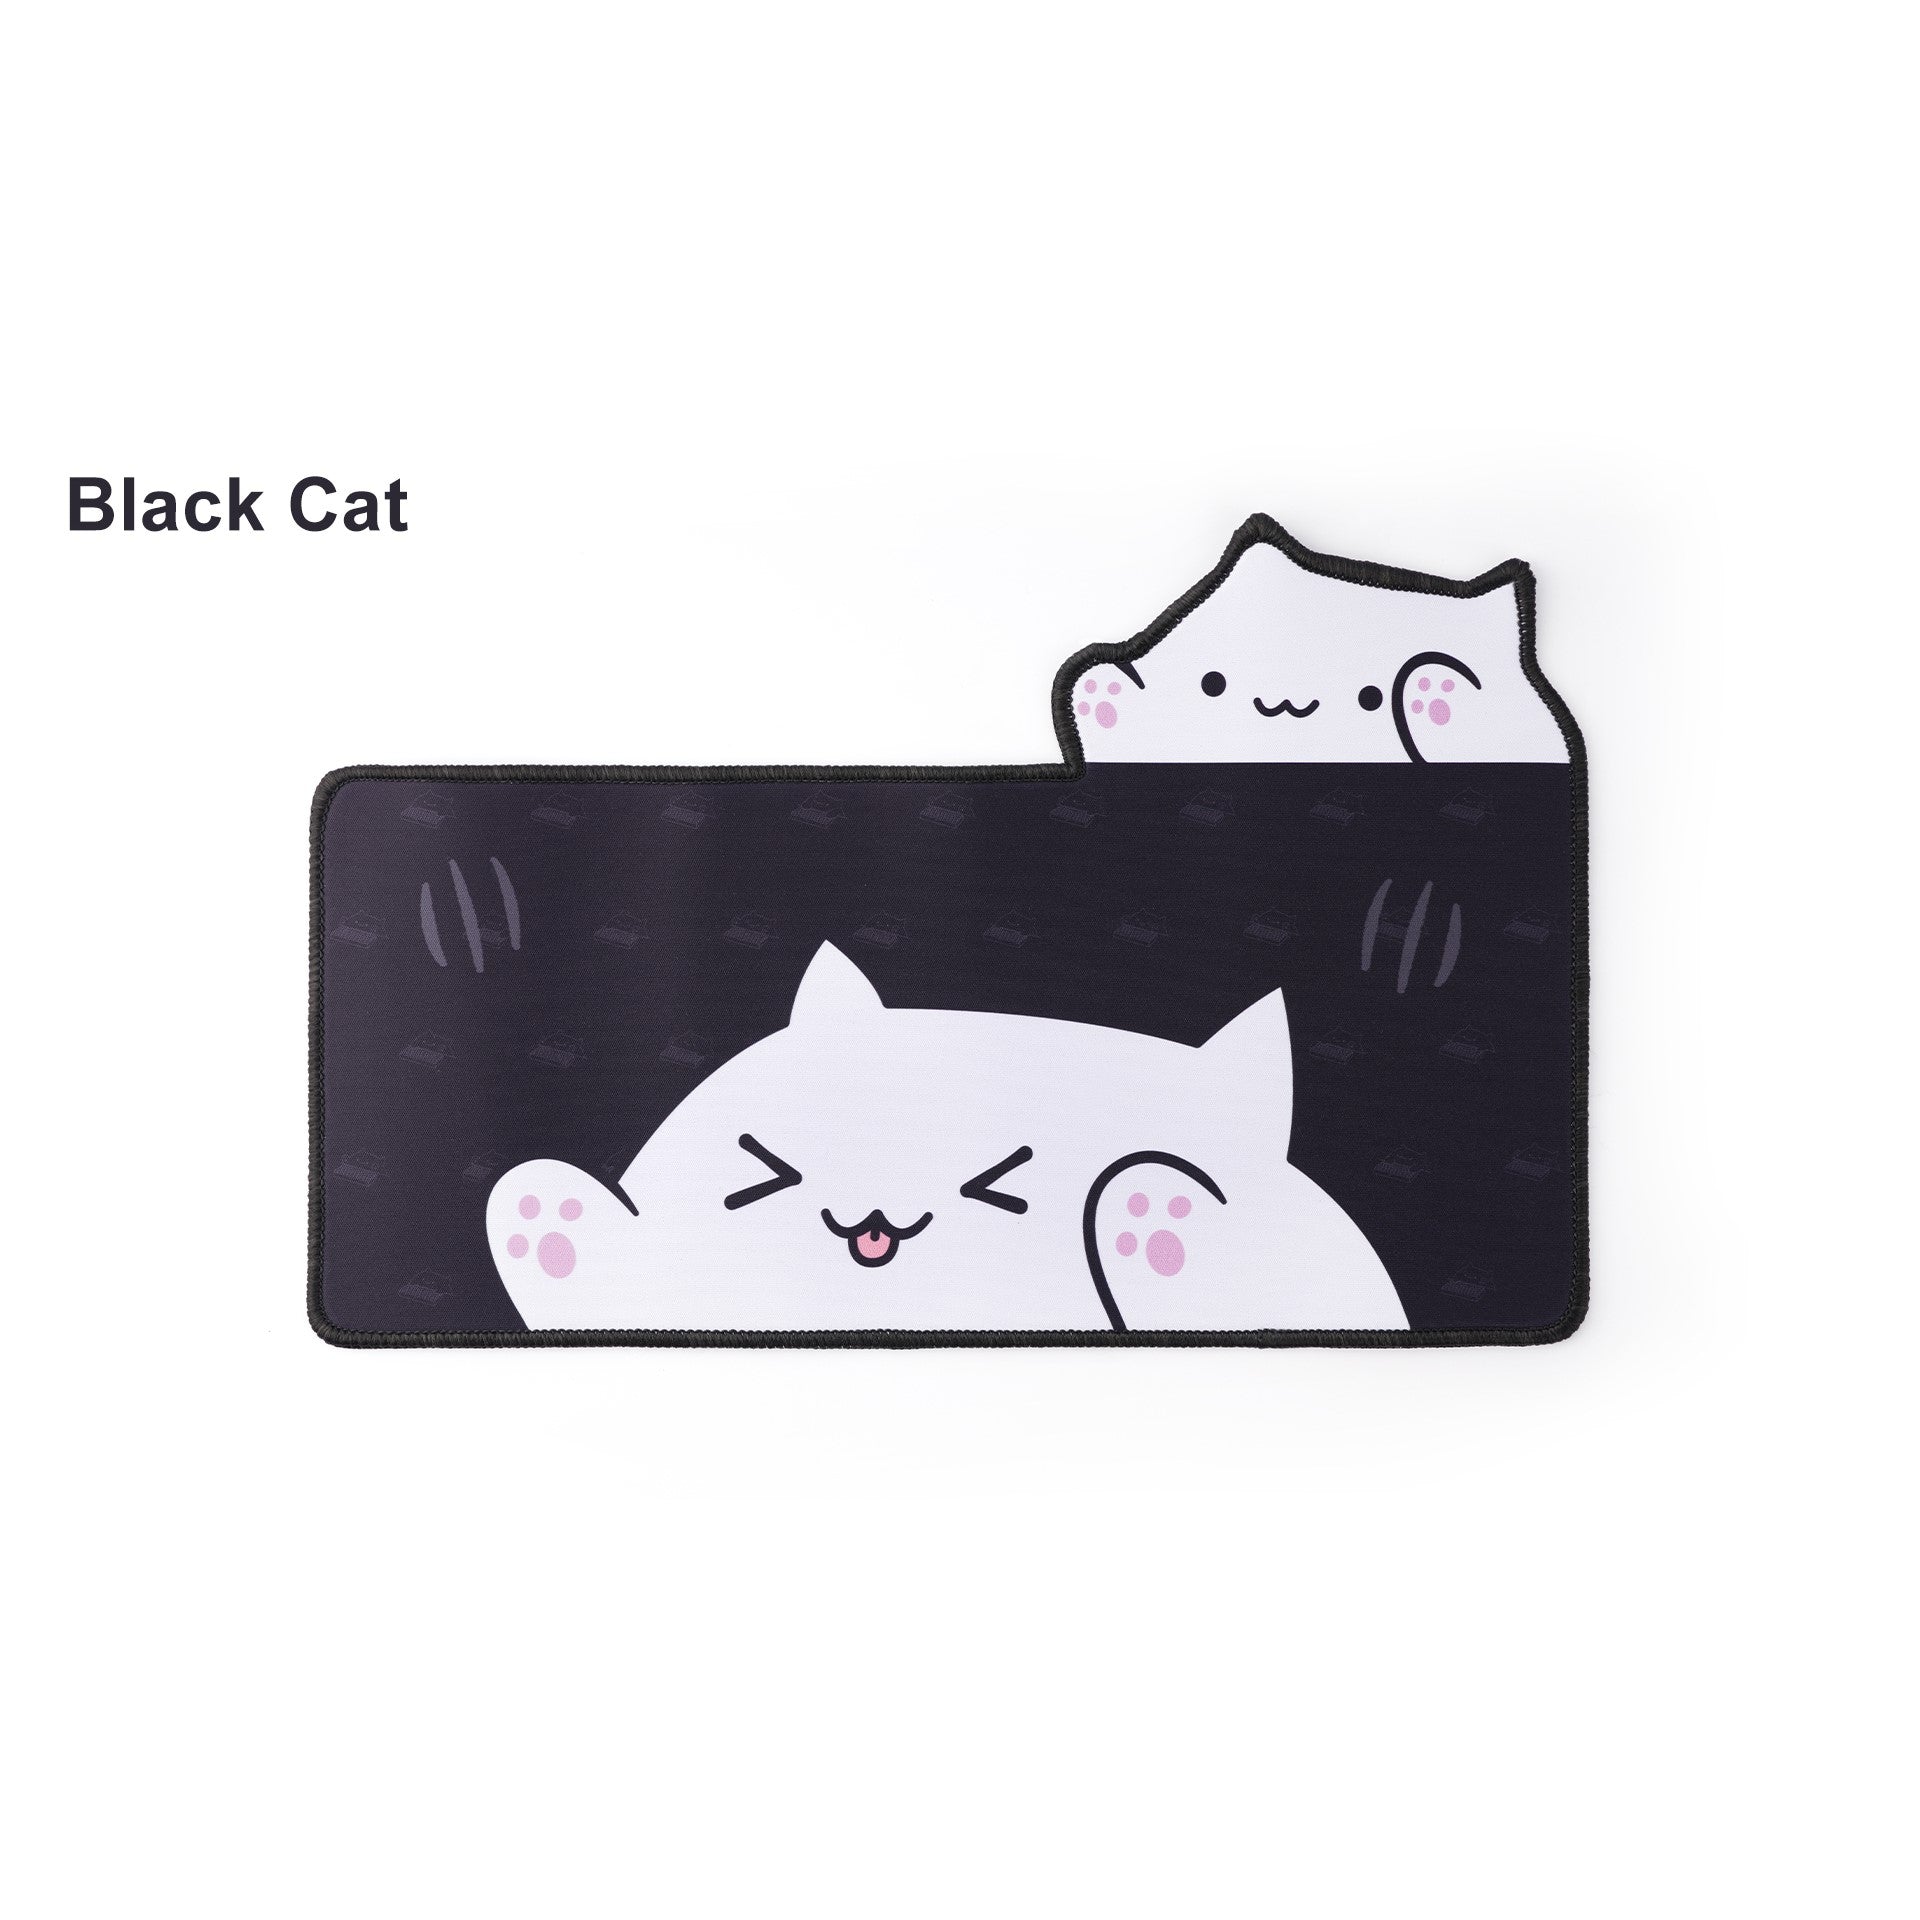 Deskmat "Clickitty Clackitty Catpads"